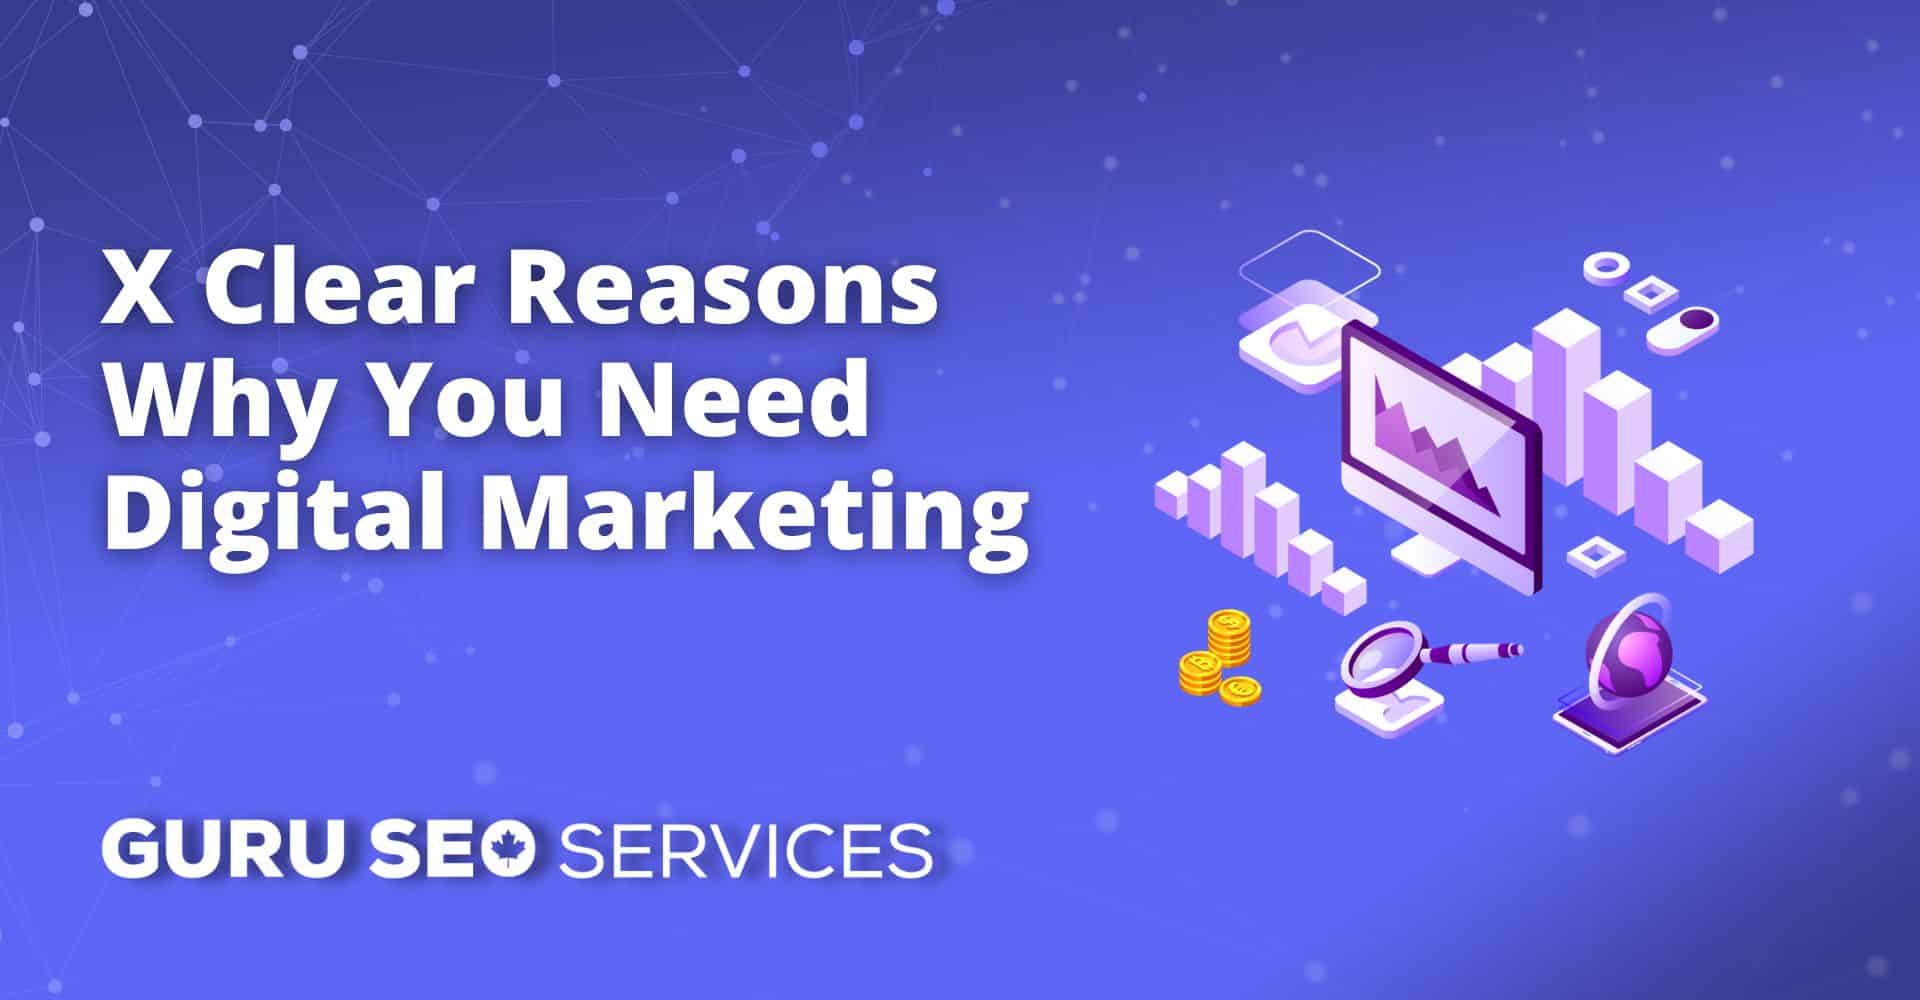 X clear reasons why you need digital marketing services.